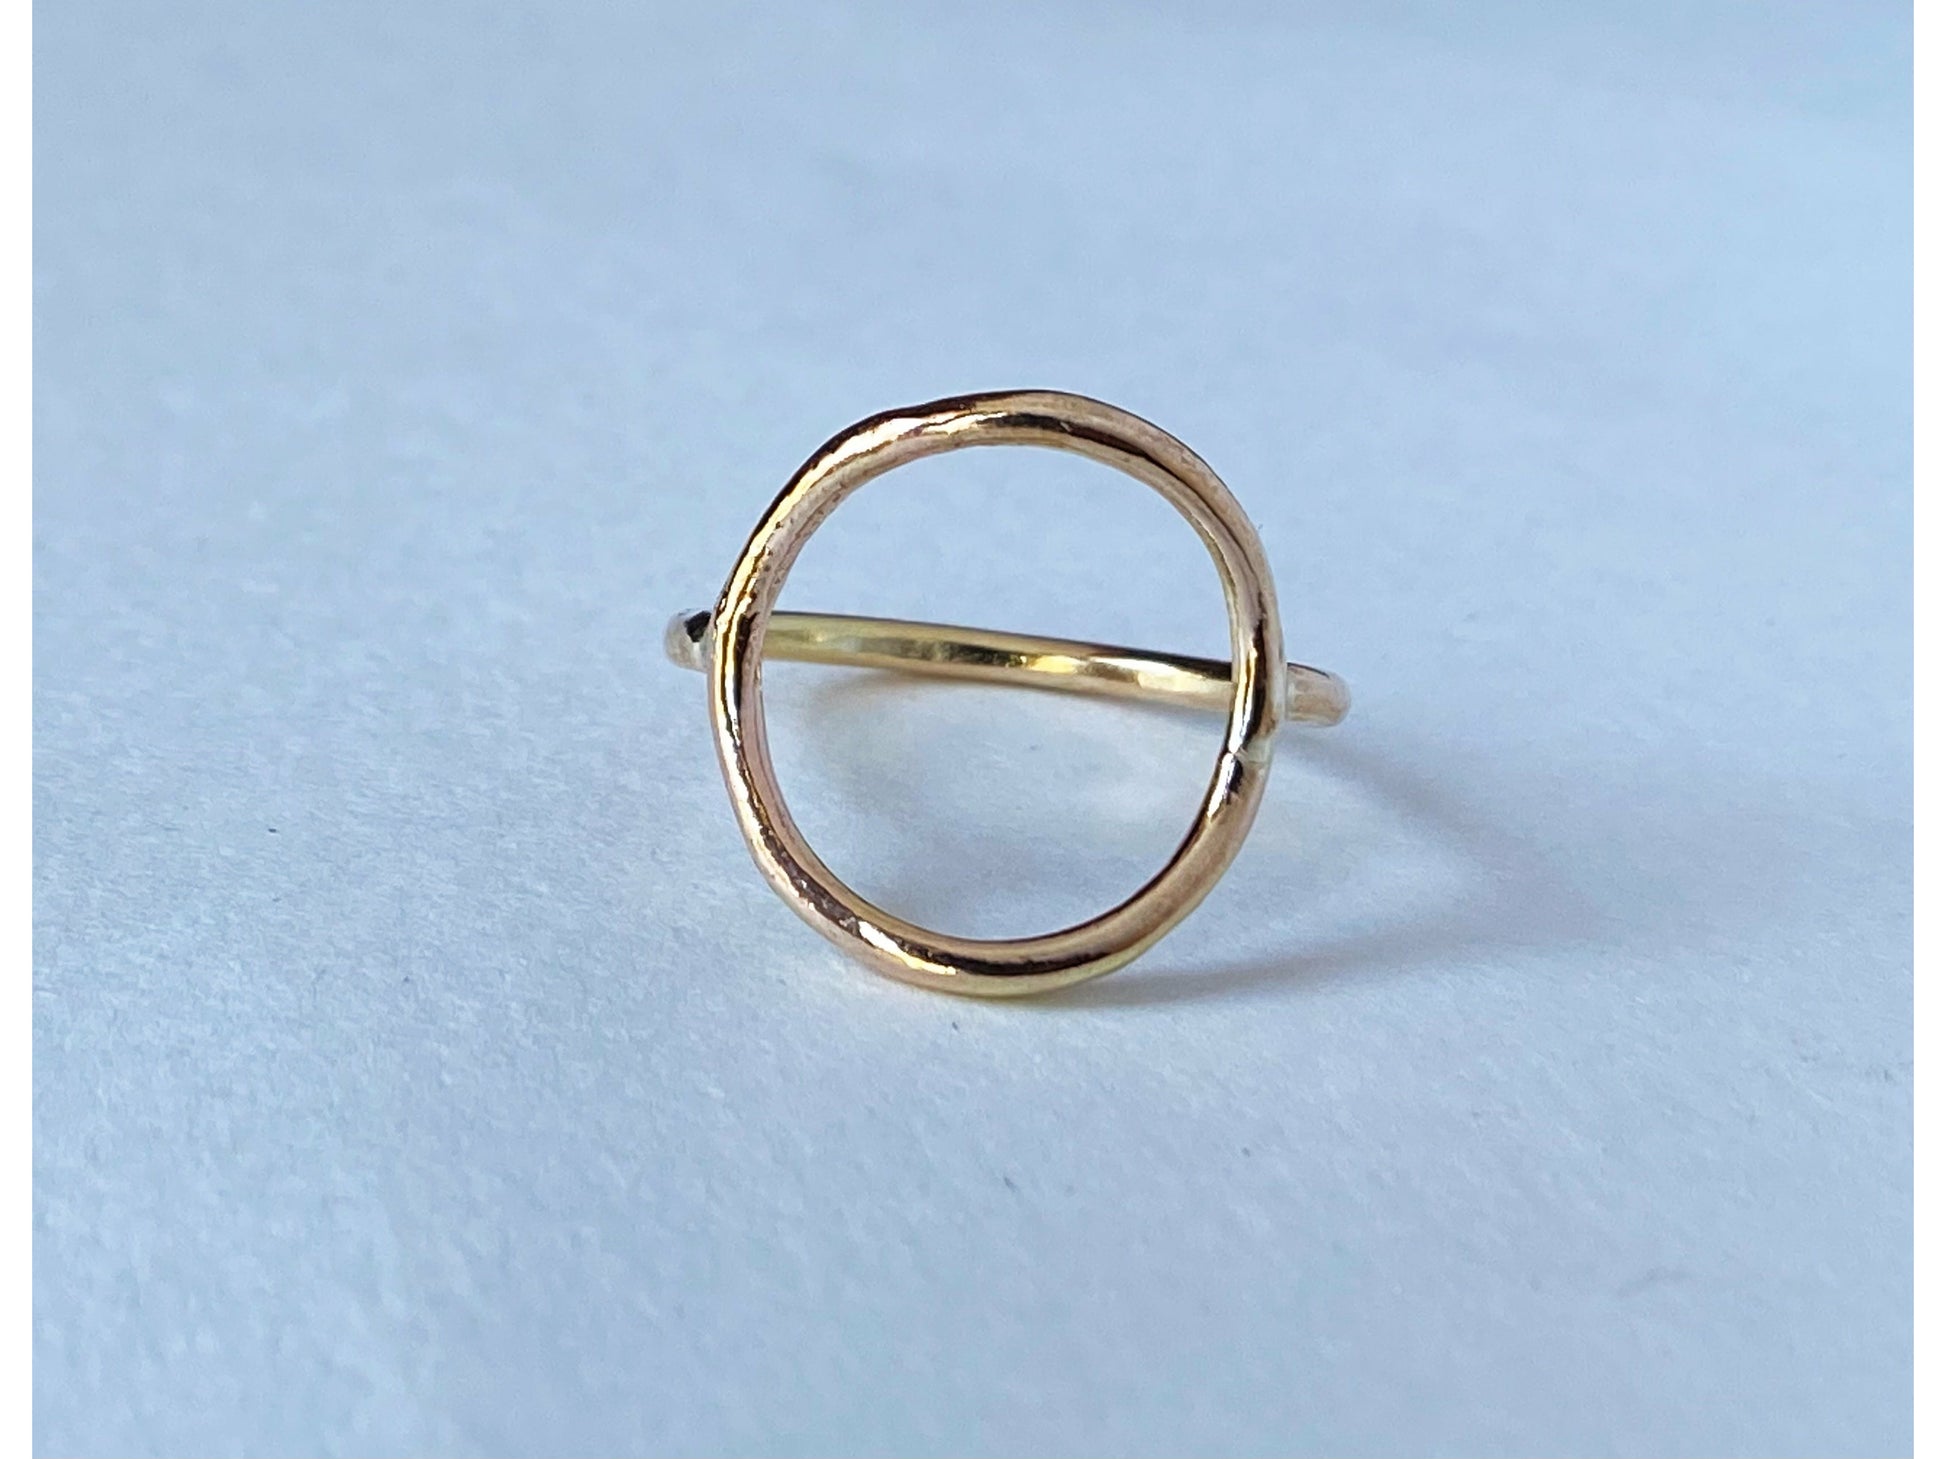 Circle ring in either silver or gold. Band meets the circle on the left and right size, open circle no back.